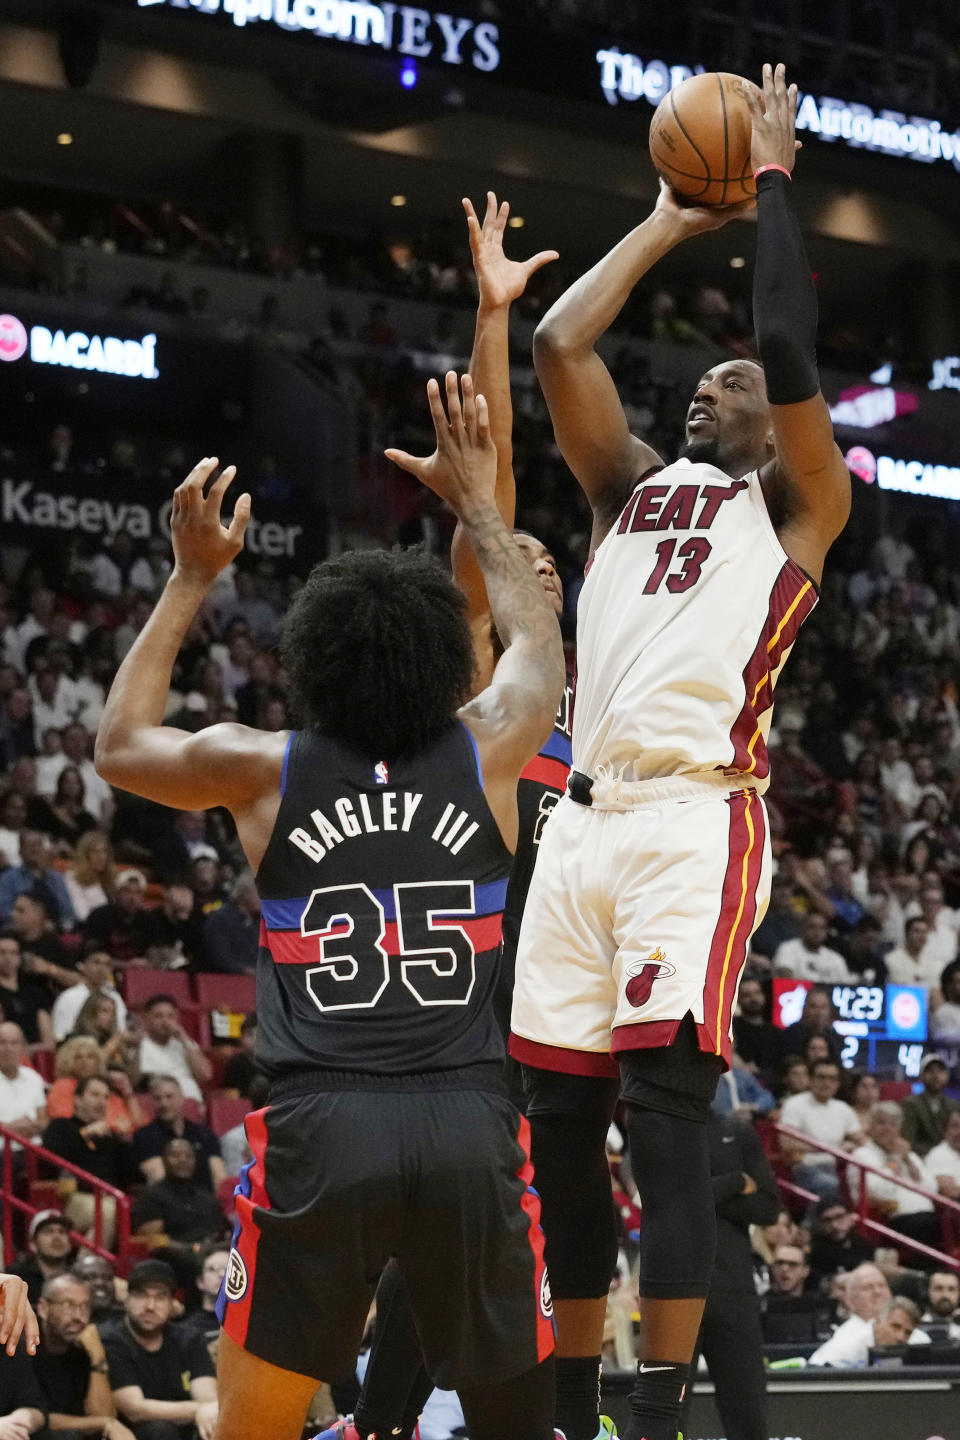 Miami Heat center Bam Adebayo (13) aims to score as Detroit Pistons forward Marvin Bagley III (35) defends during the first half of an NBA basketball game, Wednesday, Oct. 25, 2023, in Miami. (AP Photo/Marta Lavandier)